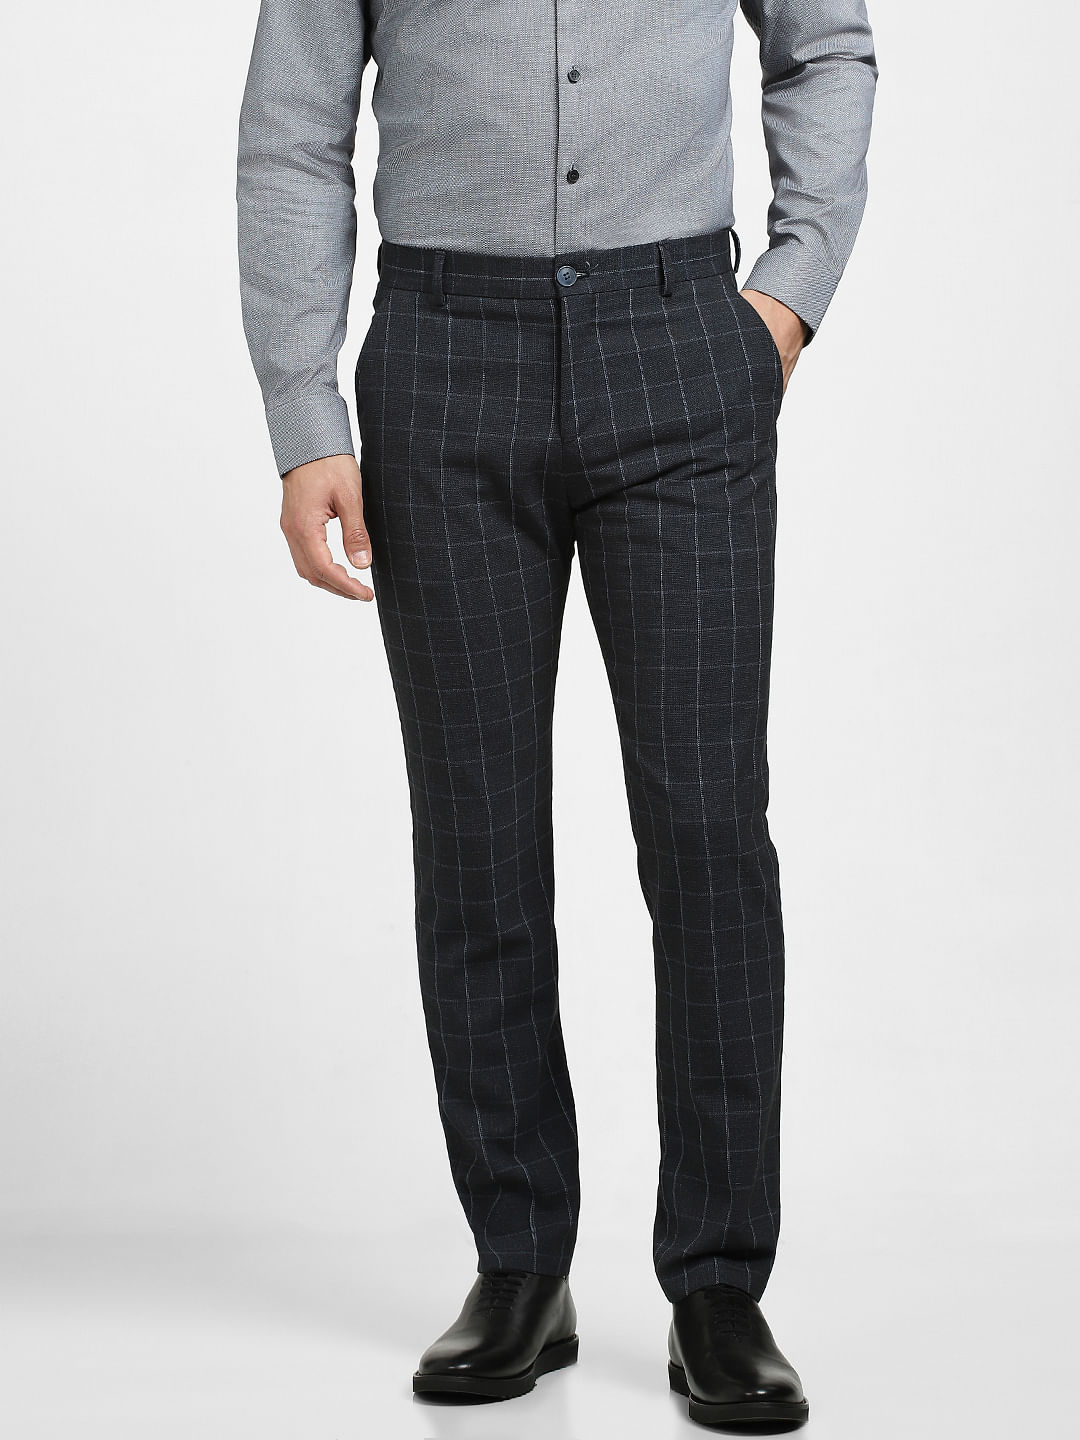 Regular Fit 4 Pocket Straight Cotton Check Formal Trousers For Mens at Best  Price in Ahmedabad  Bss Textiles  Garments